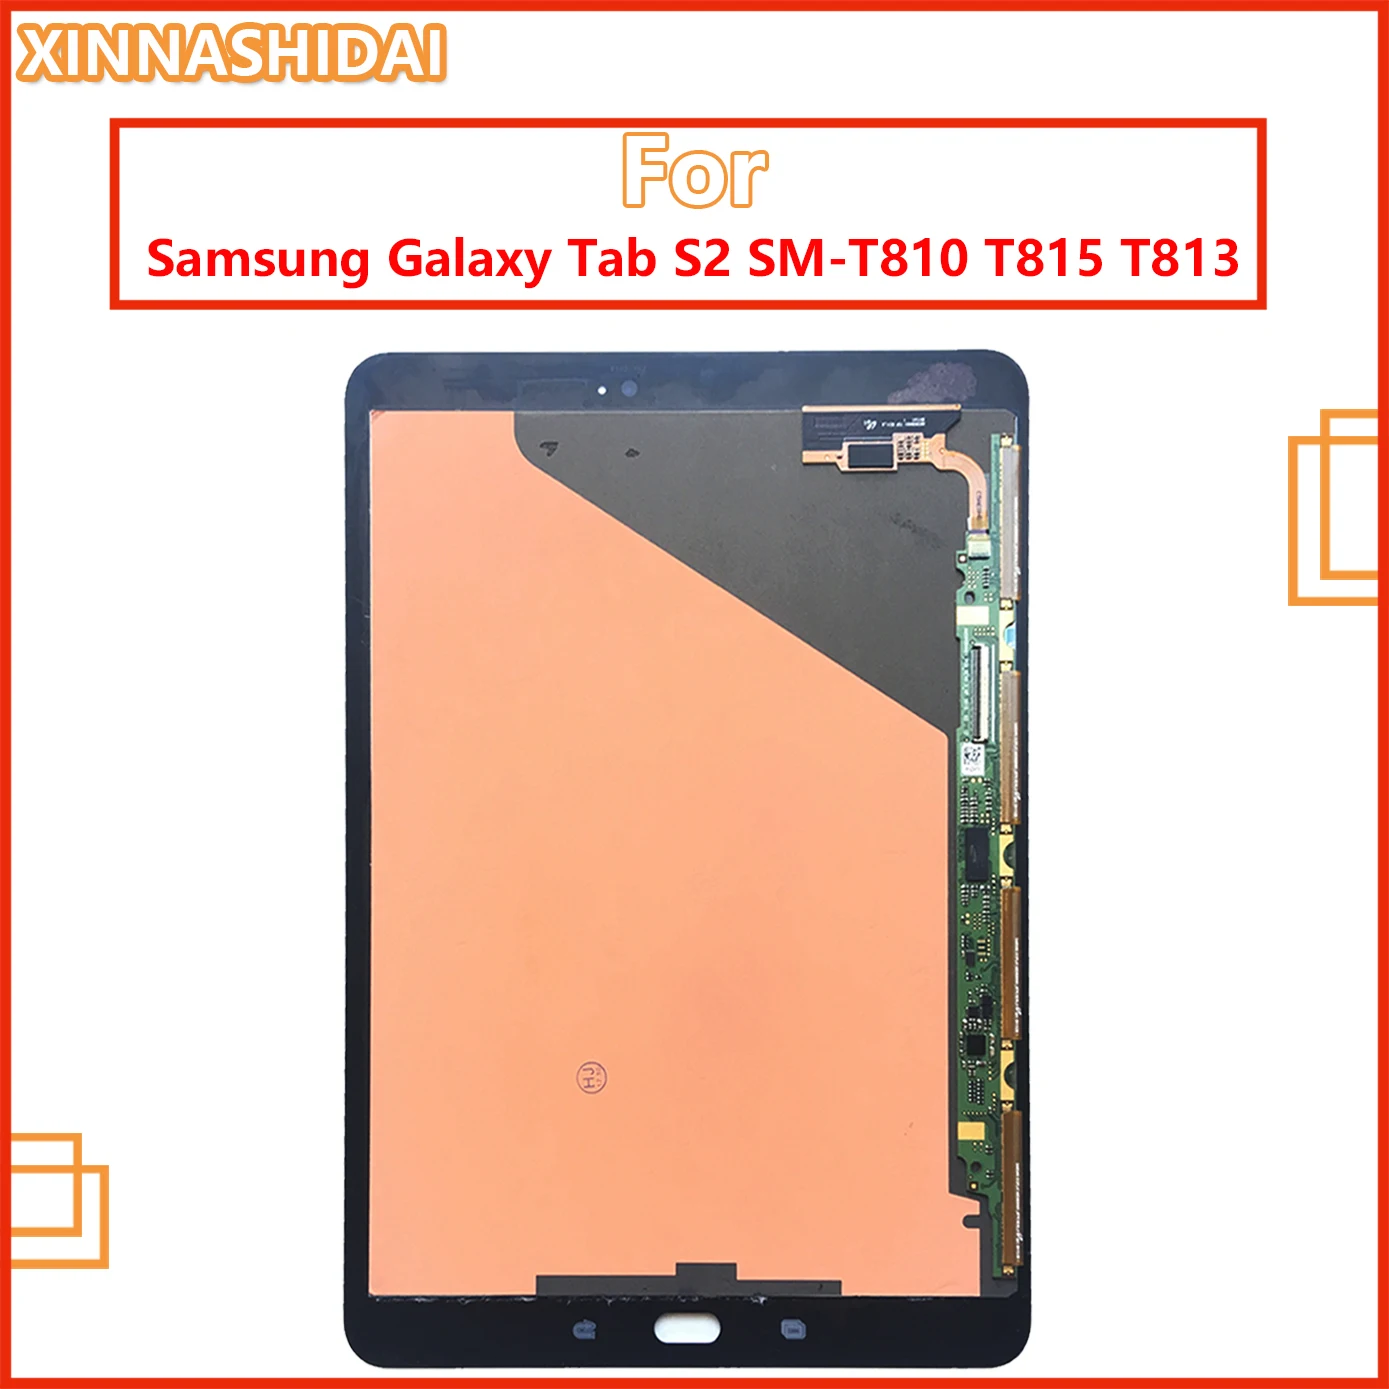 Group Vertical Replacement LCD Touch Screen Digitizer Display Assembly Compatible with Samsung Galaxy Tab S2 9.7 SM-T810 SM-T815 GV+ Performance SM-T817 SM-T813 Gold 